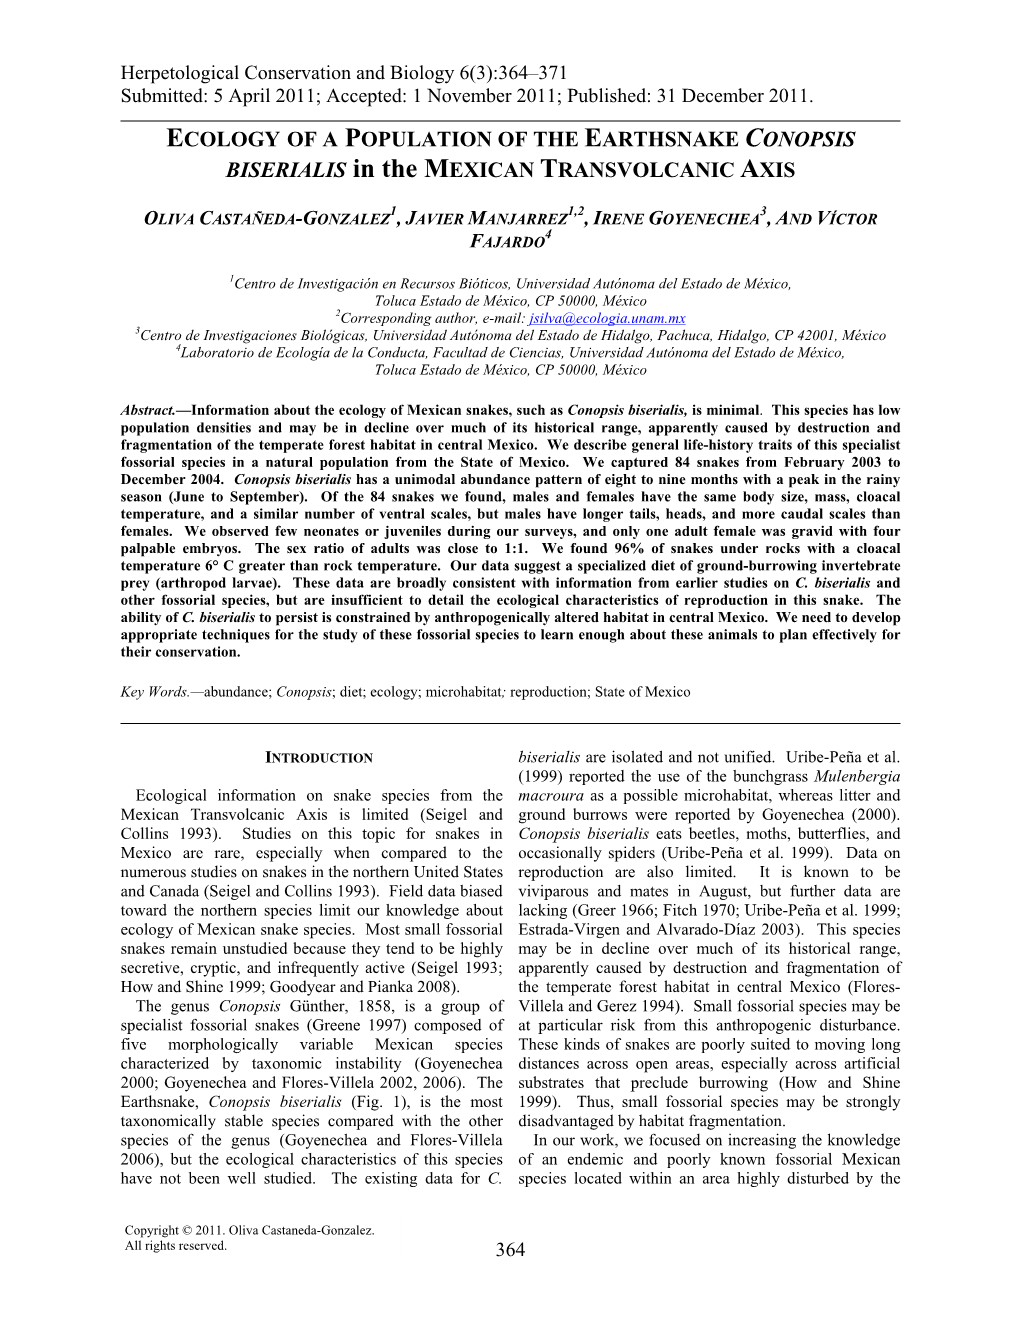 ECOLOGY of a POPULATION of the EARTHSNAKE CONOPSIS BISERIALIS in the MEXICAN TRANSVOLCANIC AXIS